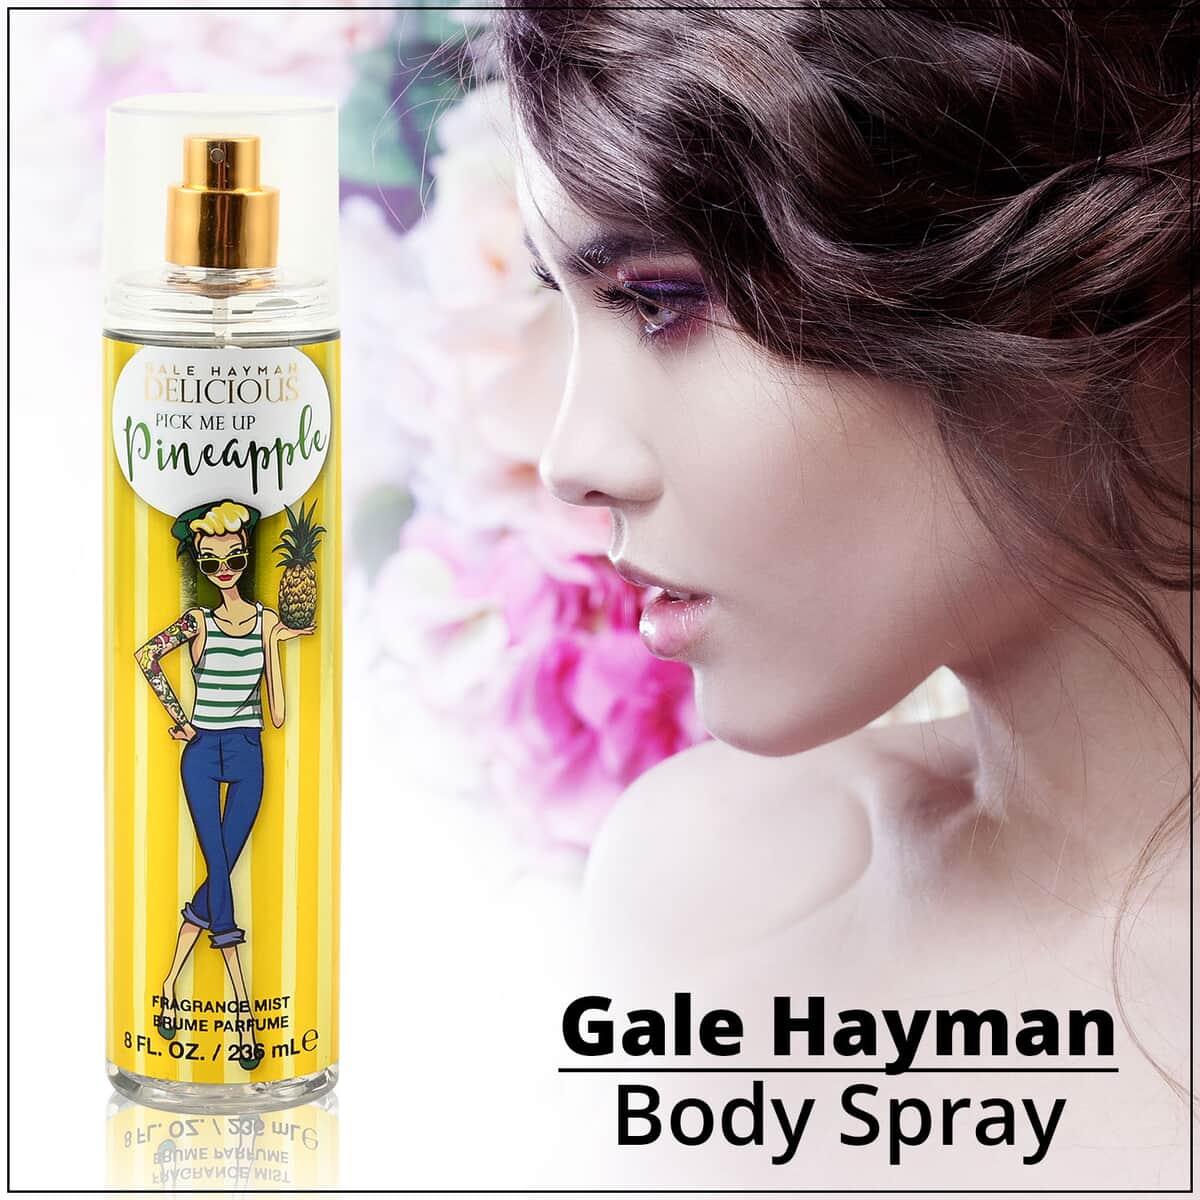 Gale Hayman Delicious PINEAPPLE Body Spray 8 oz image number 1